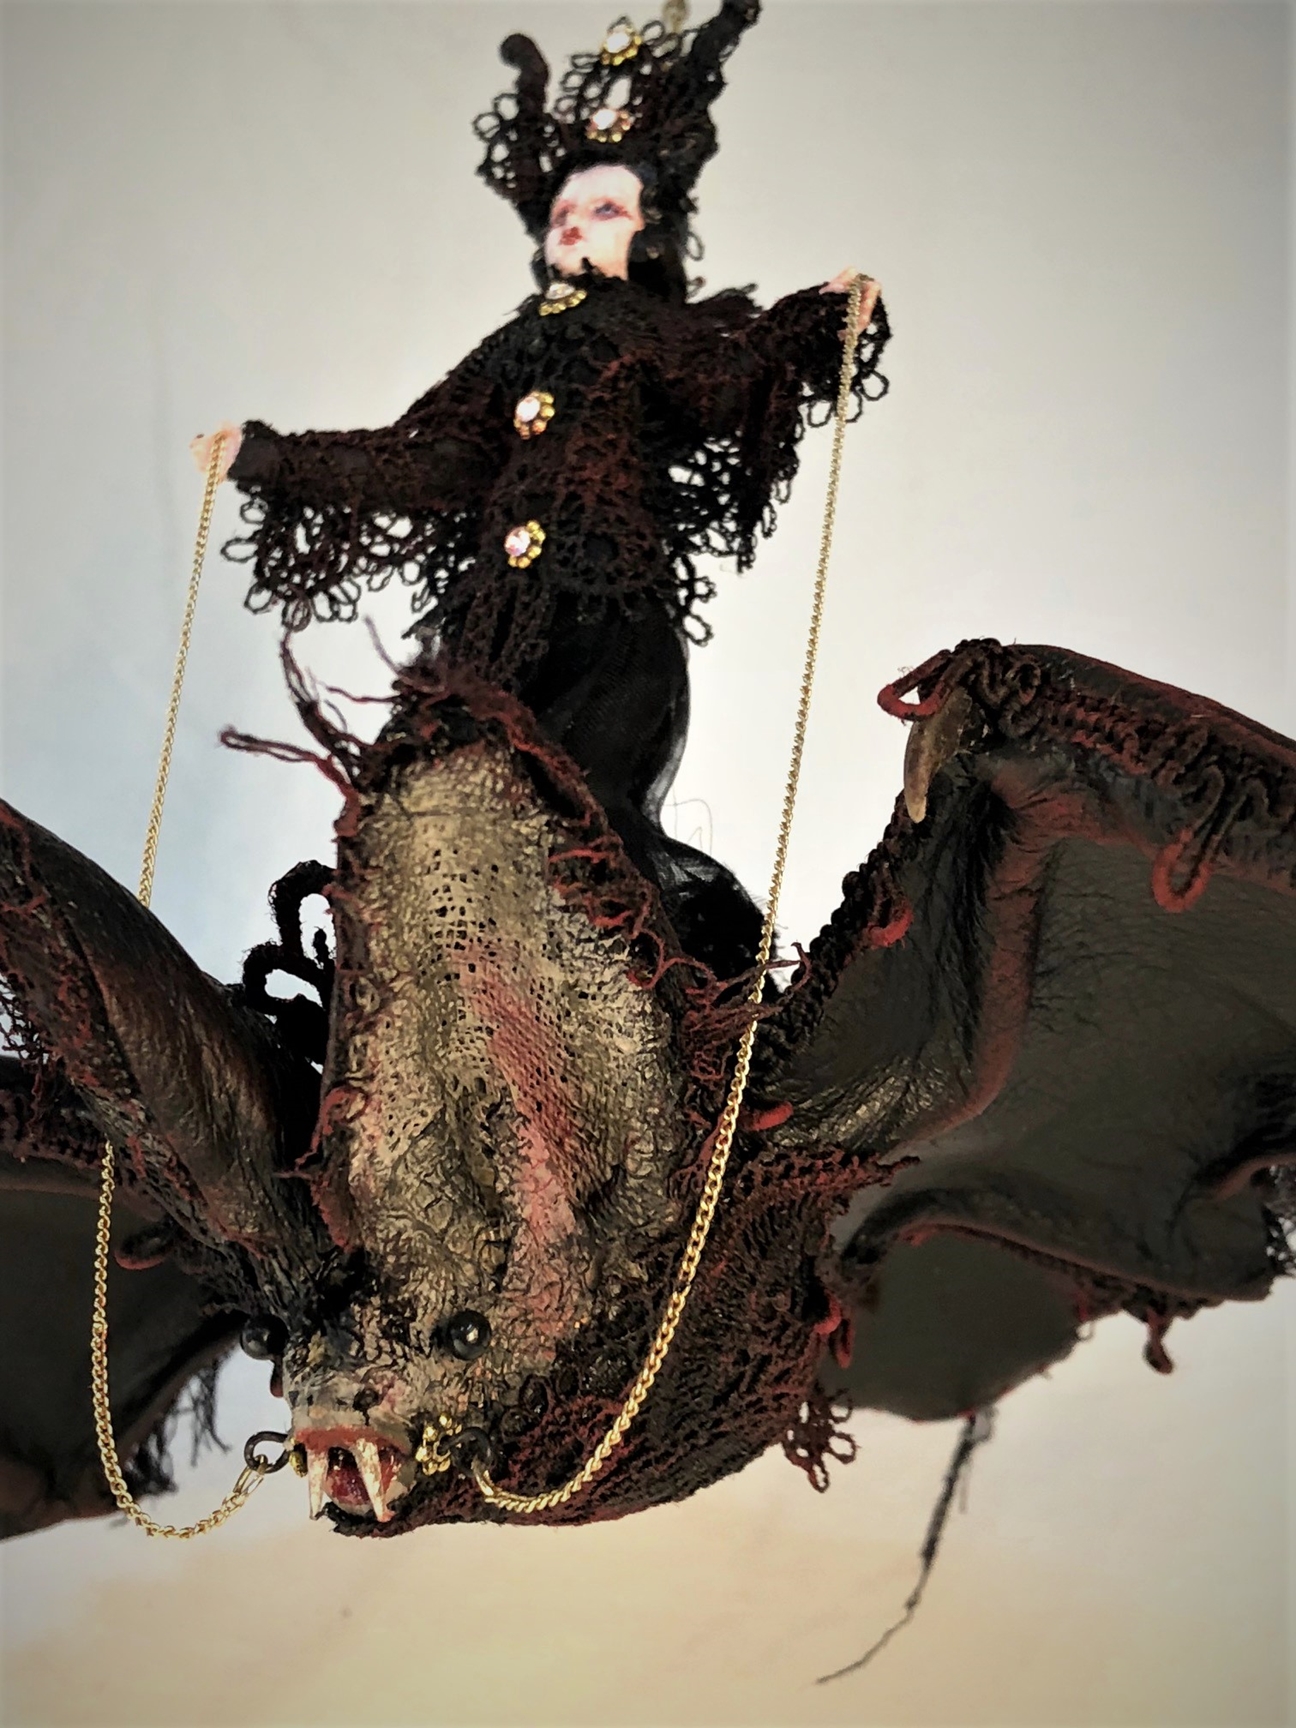 mixed media miniature gothic circus performer wearing black lace rides a lace-covered vintage toy bat.